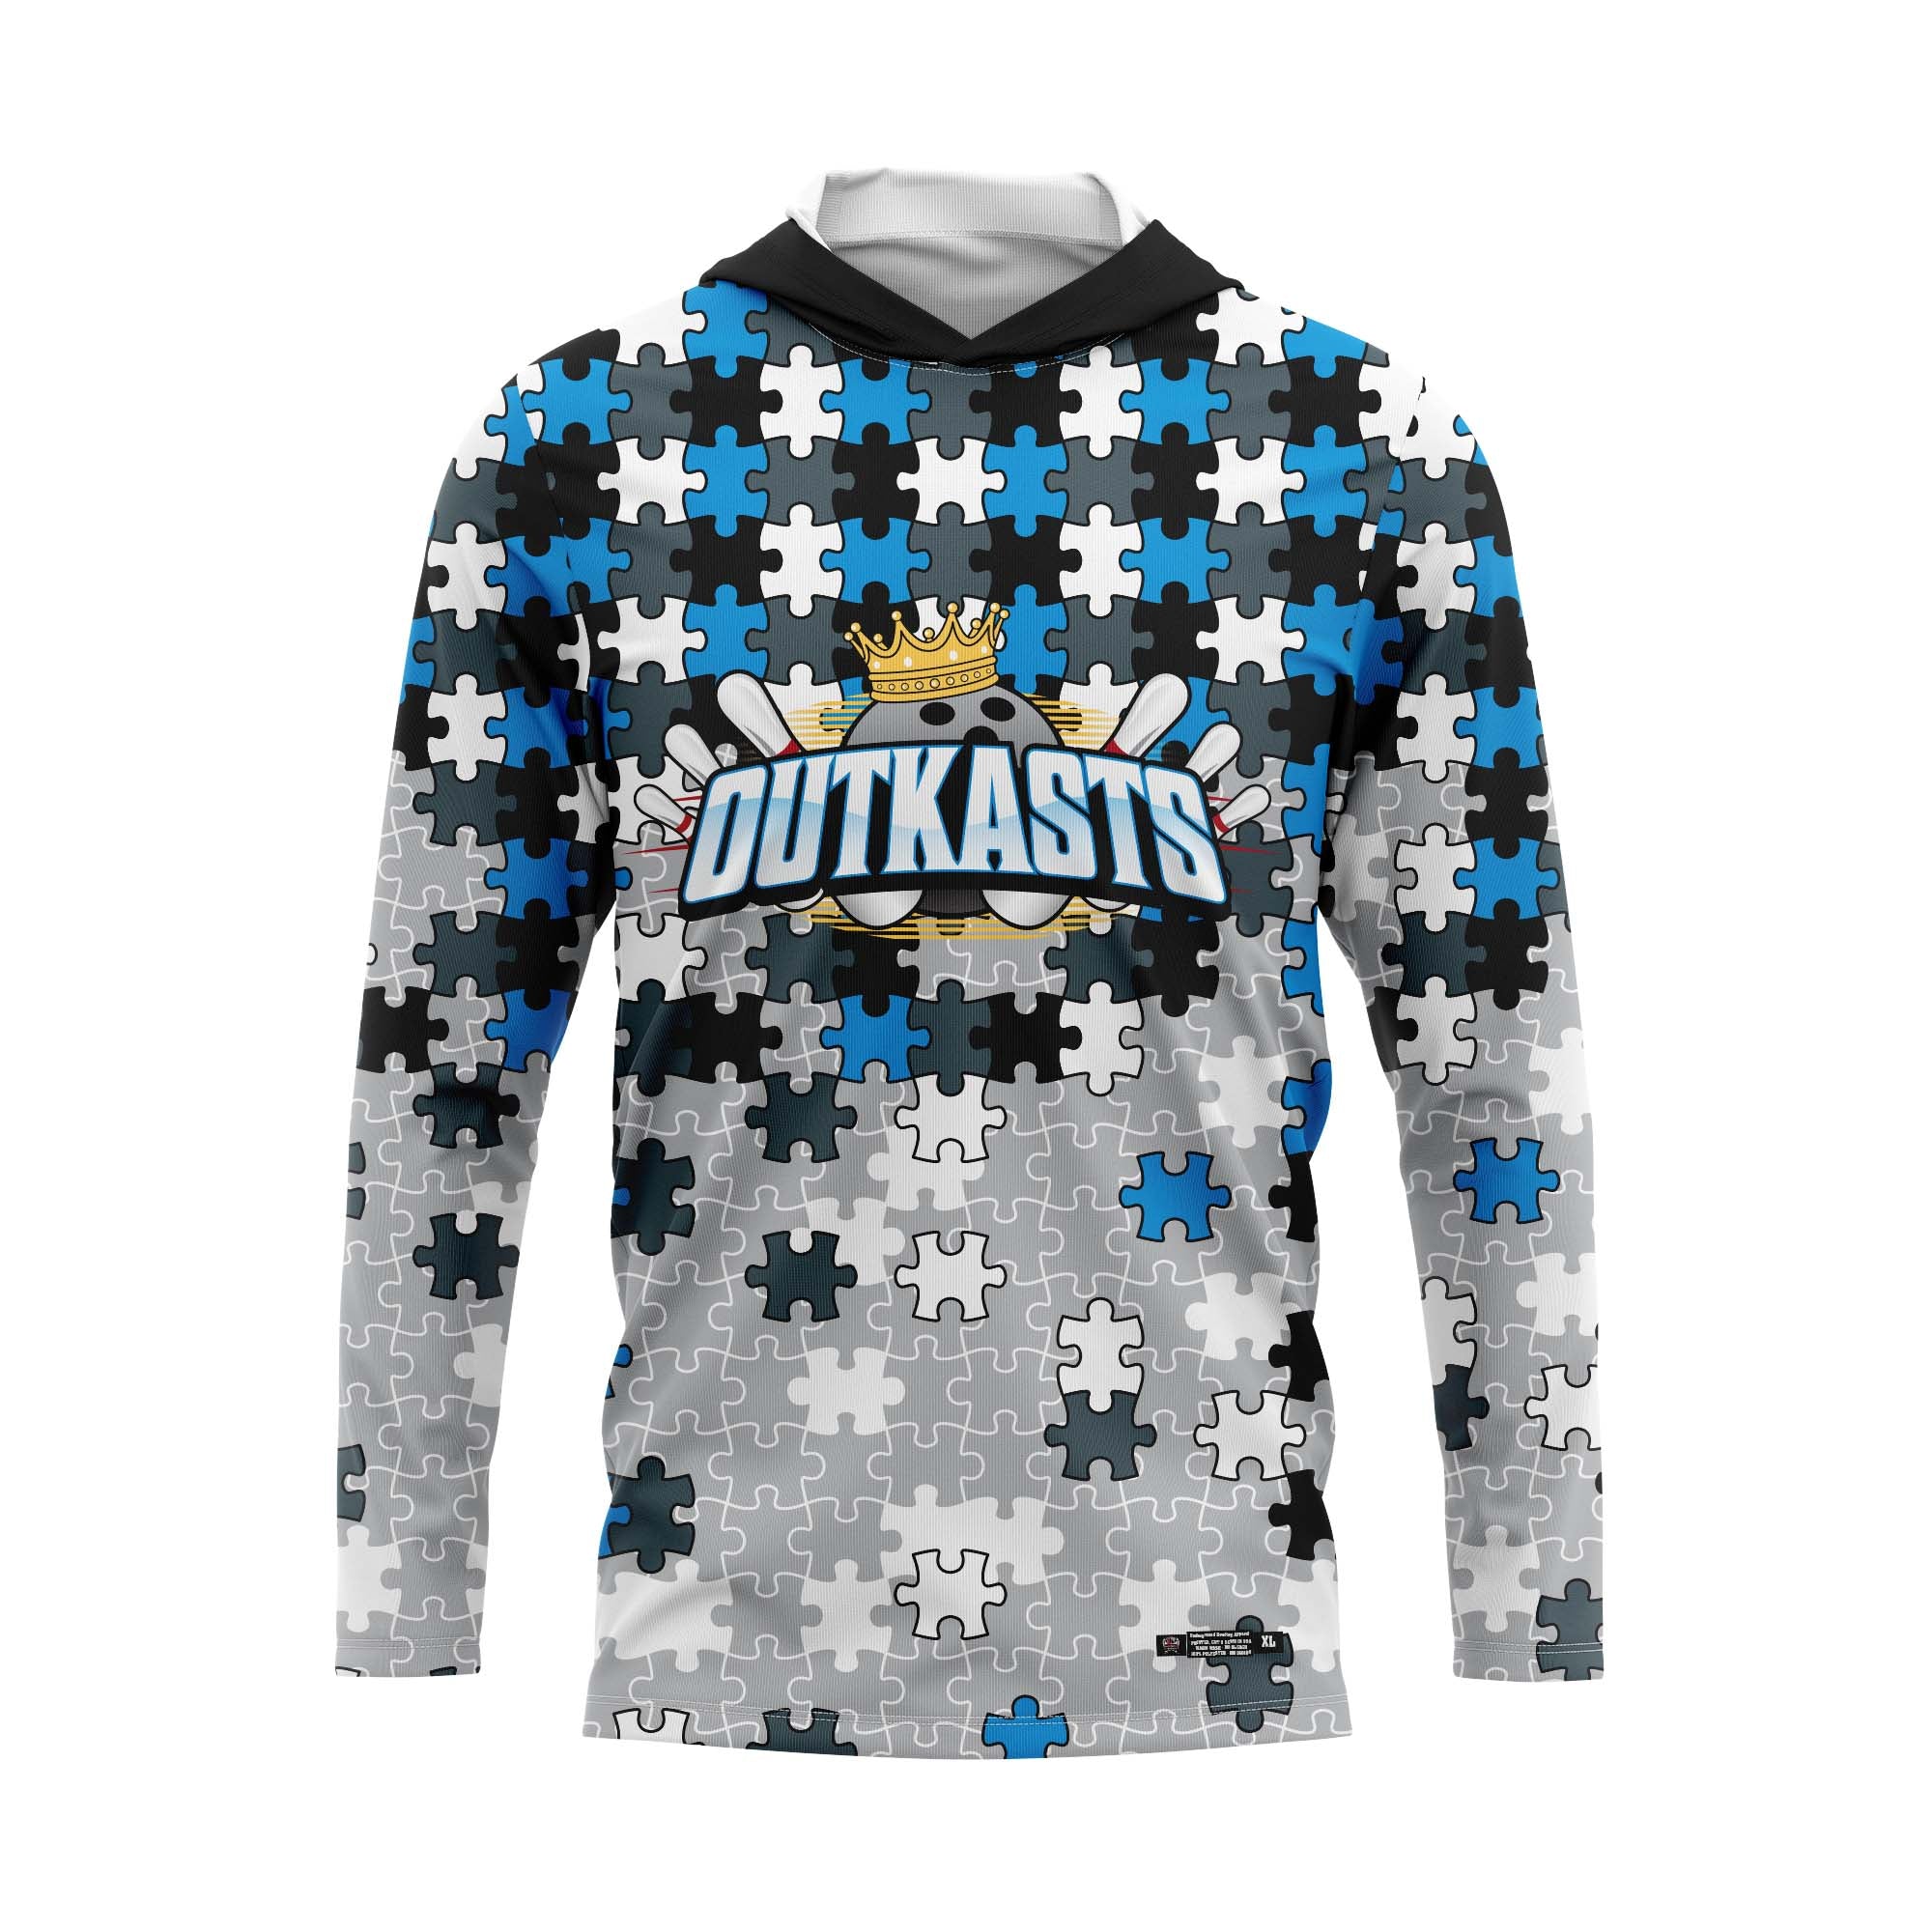 Outkasts Puzzle Jersey